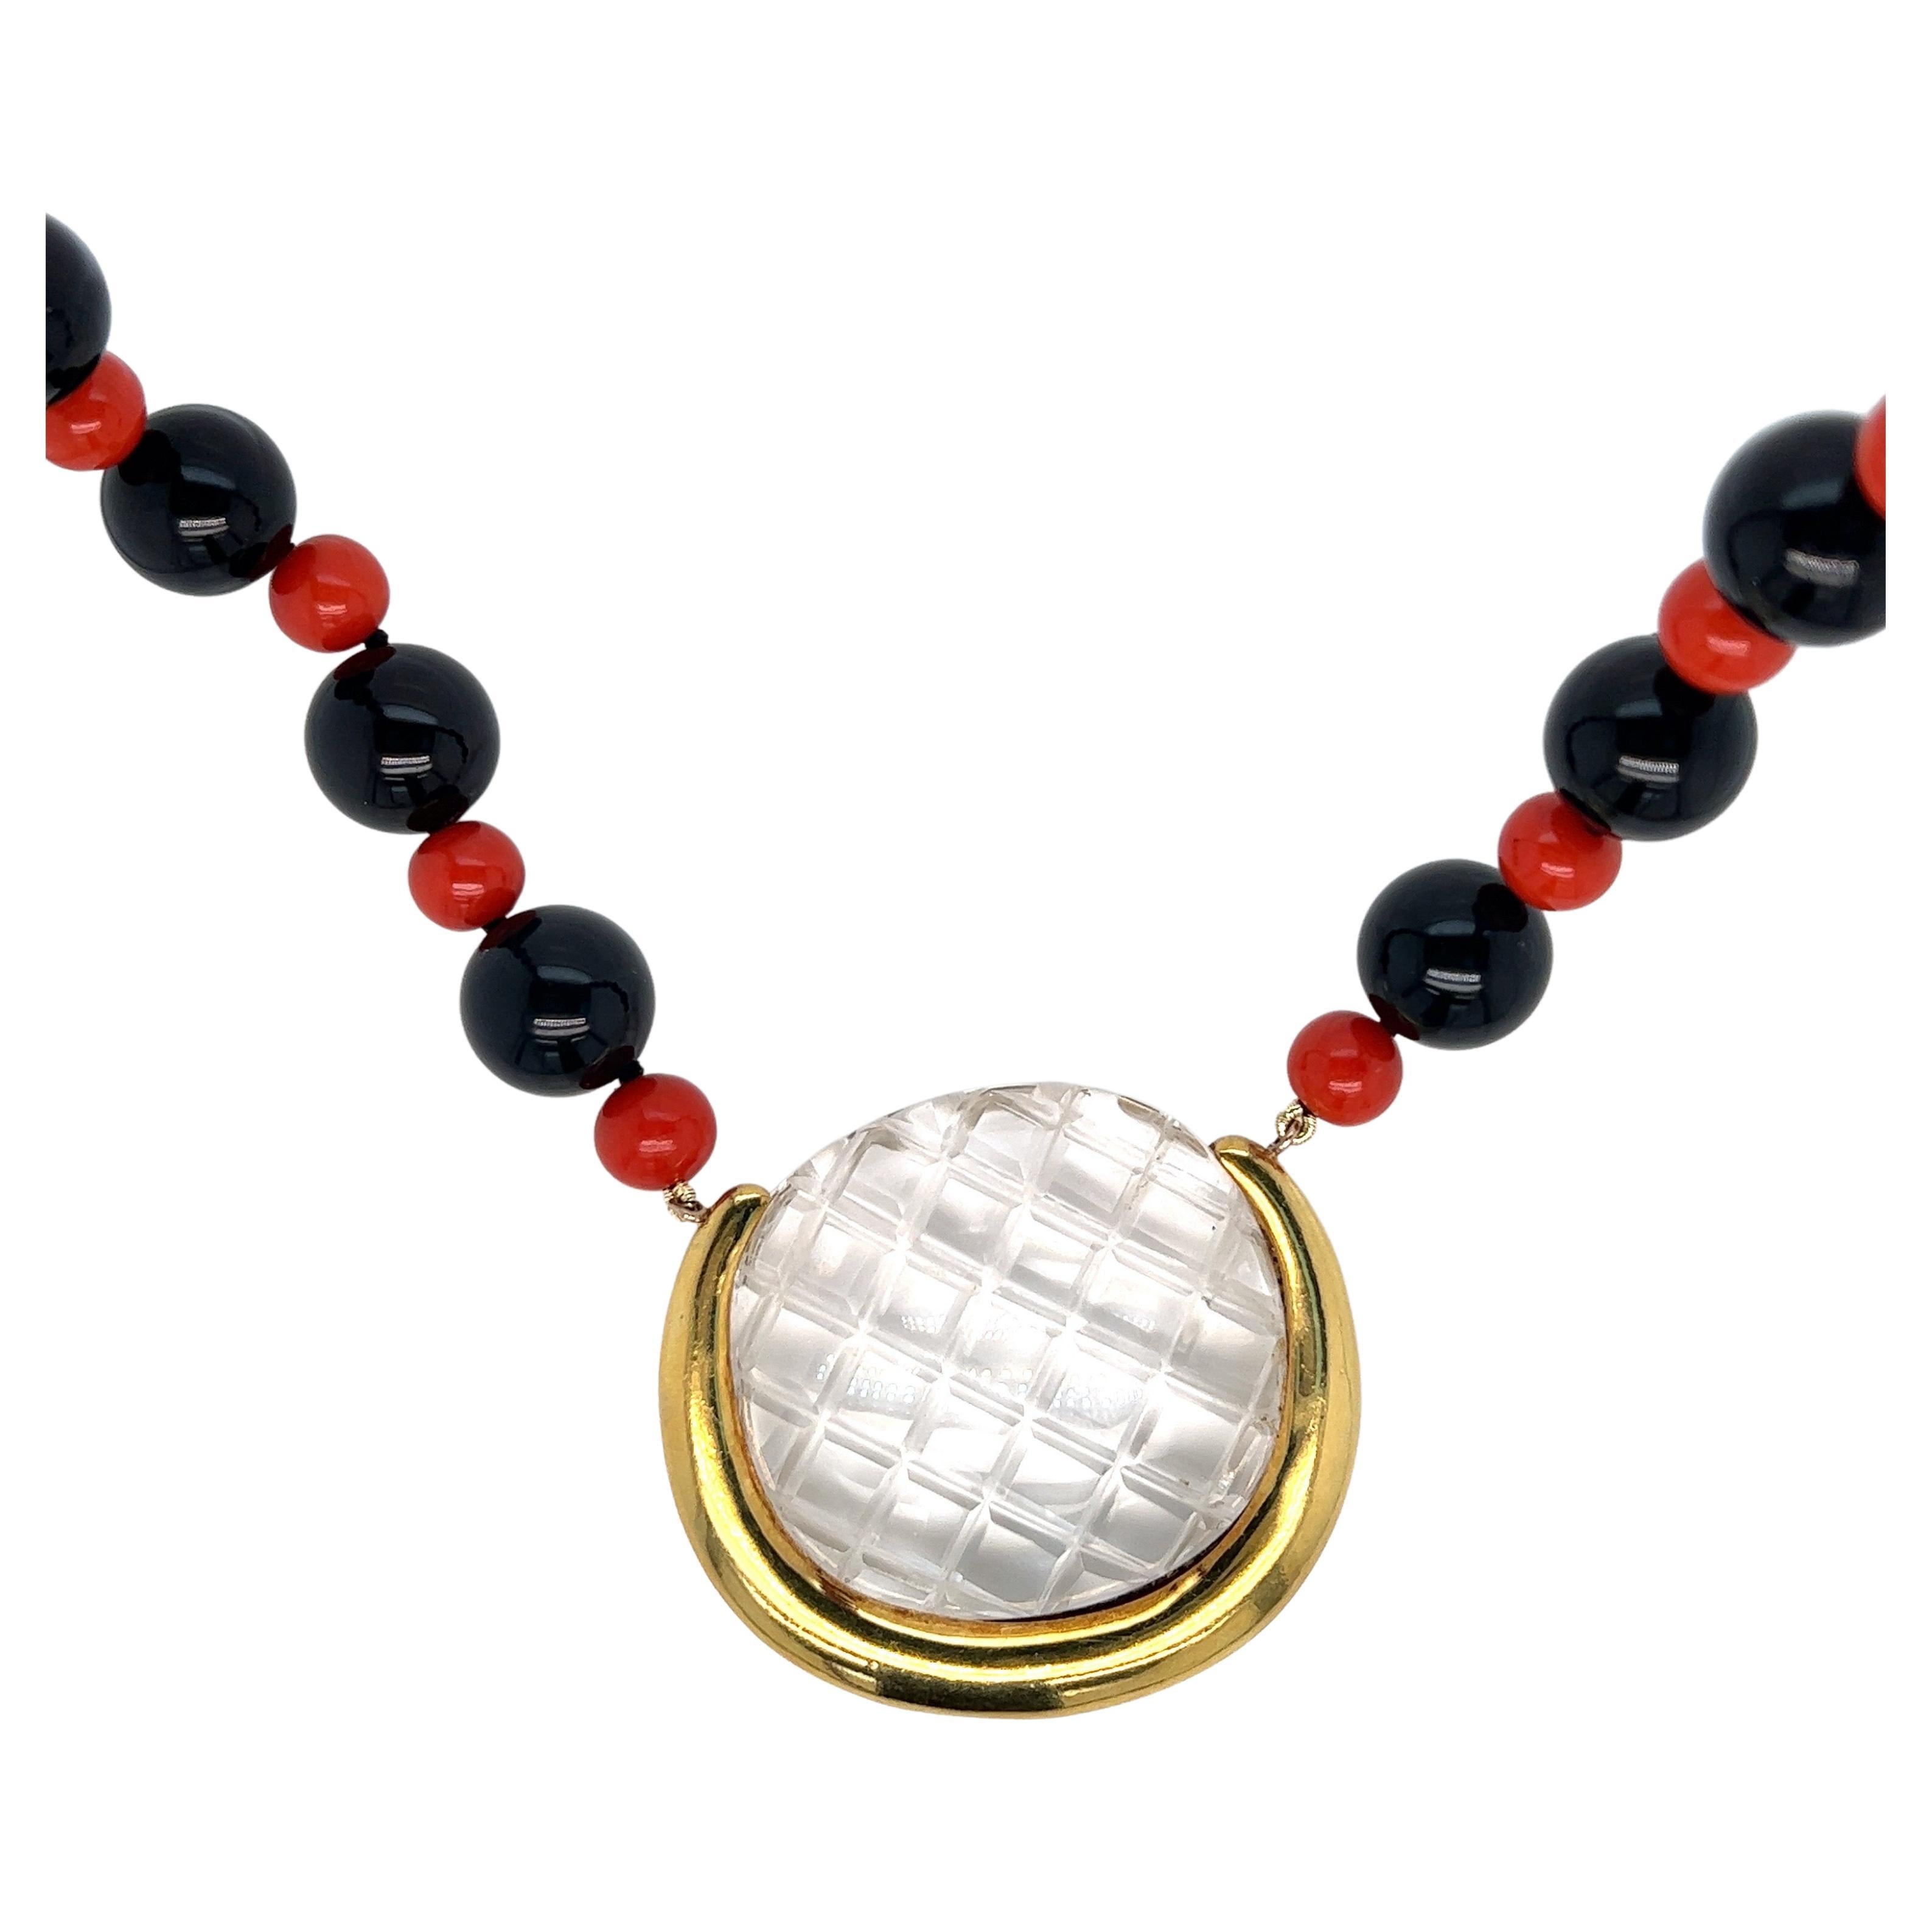 Aldo Cipullo Gold Crystal Pendant with Black Onyx and Coral Necklace